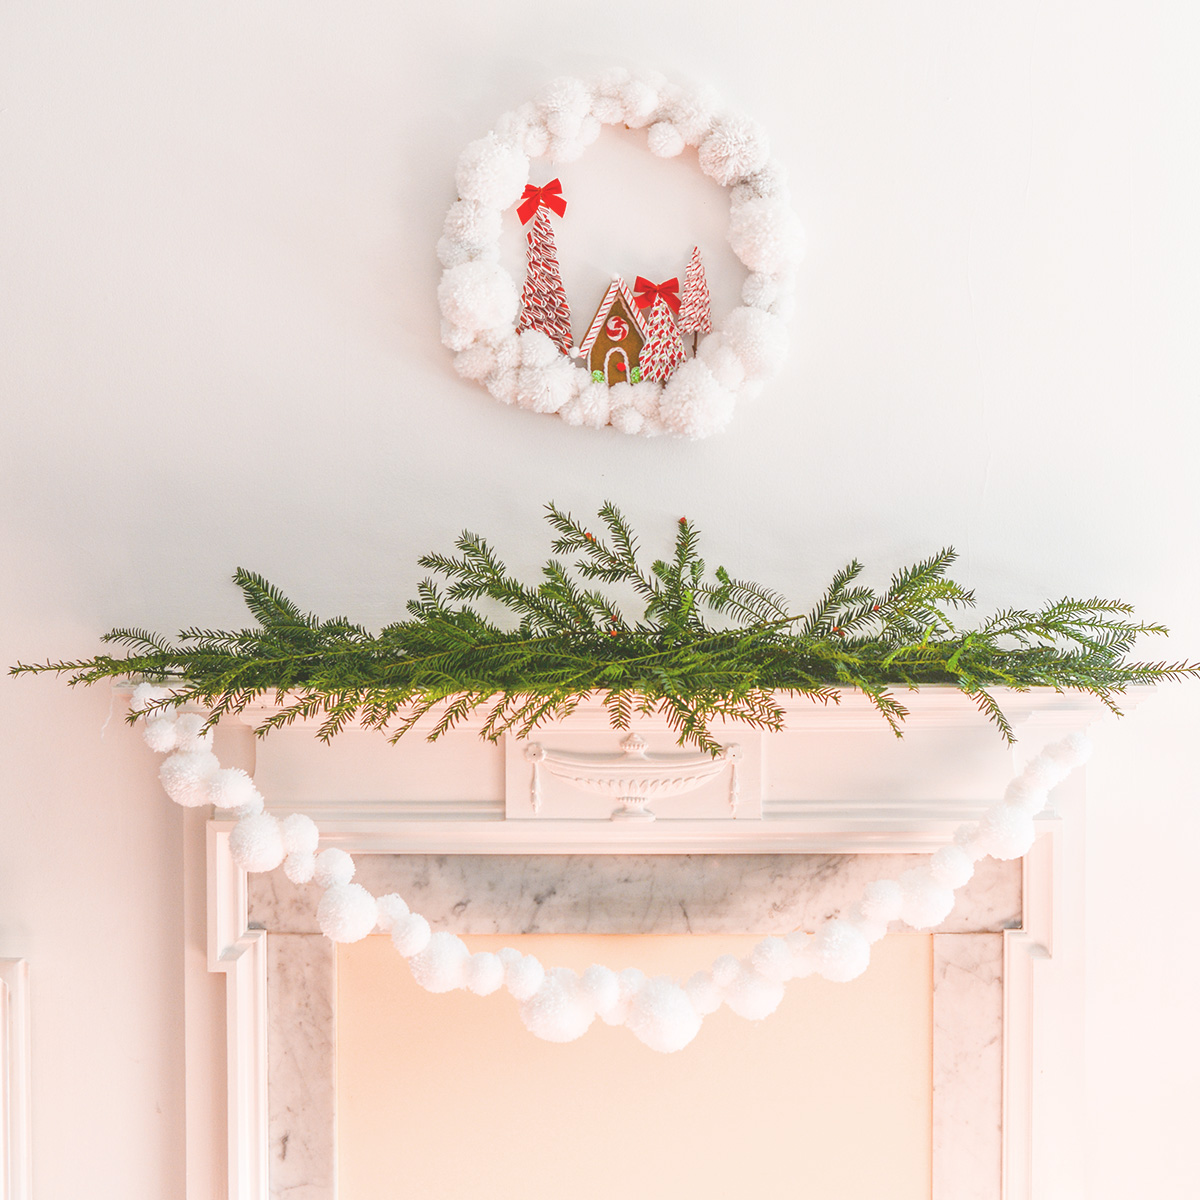 white pom pom garland hanging from a white fireplace mantel decorated with sprigs of fresh evergreen branches.  A pom pom wreath hangs above the fireplace.